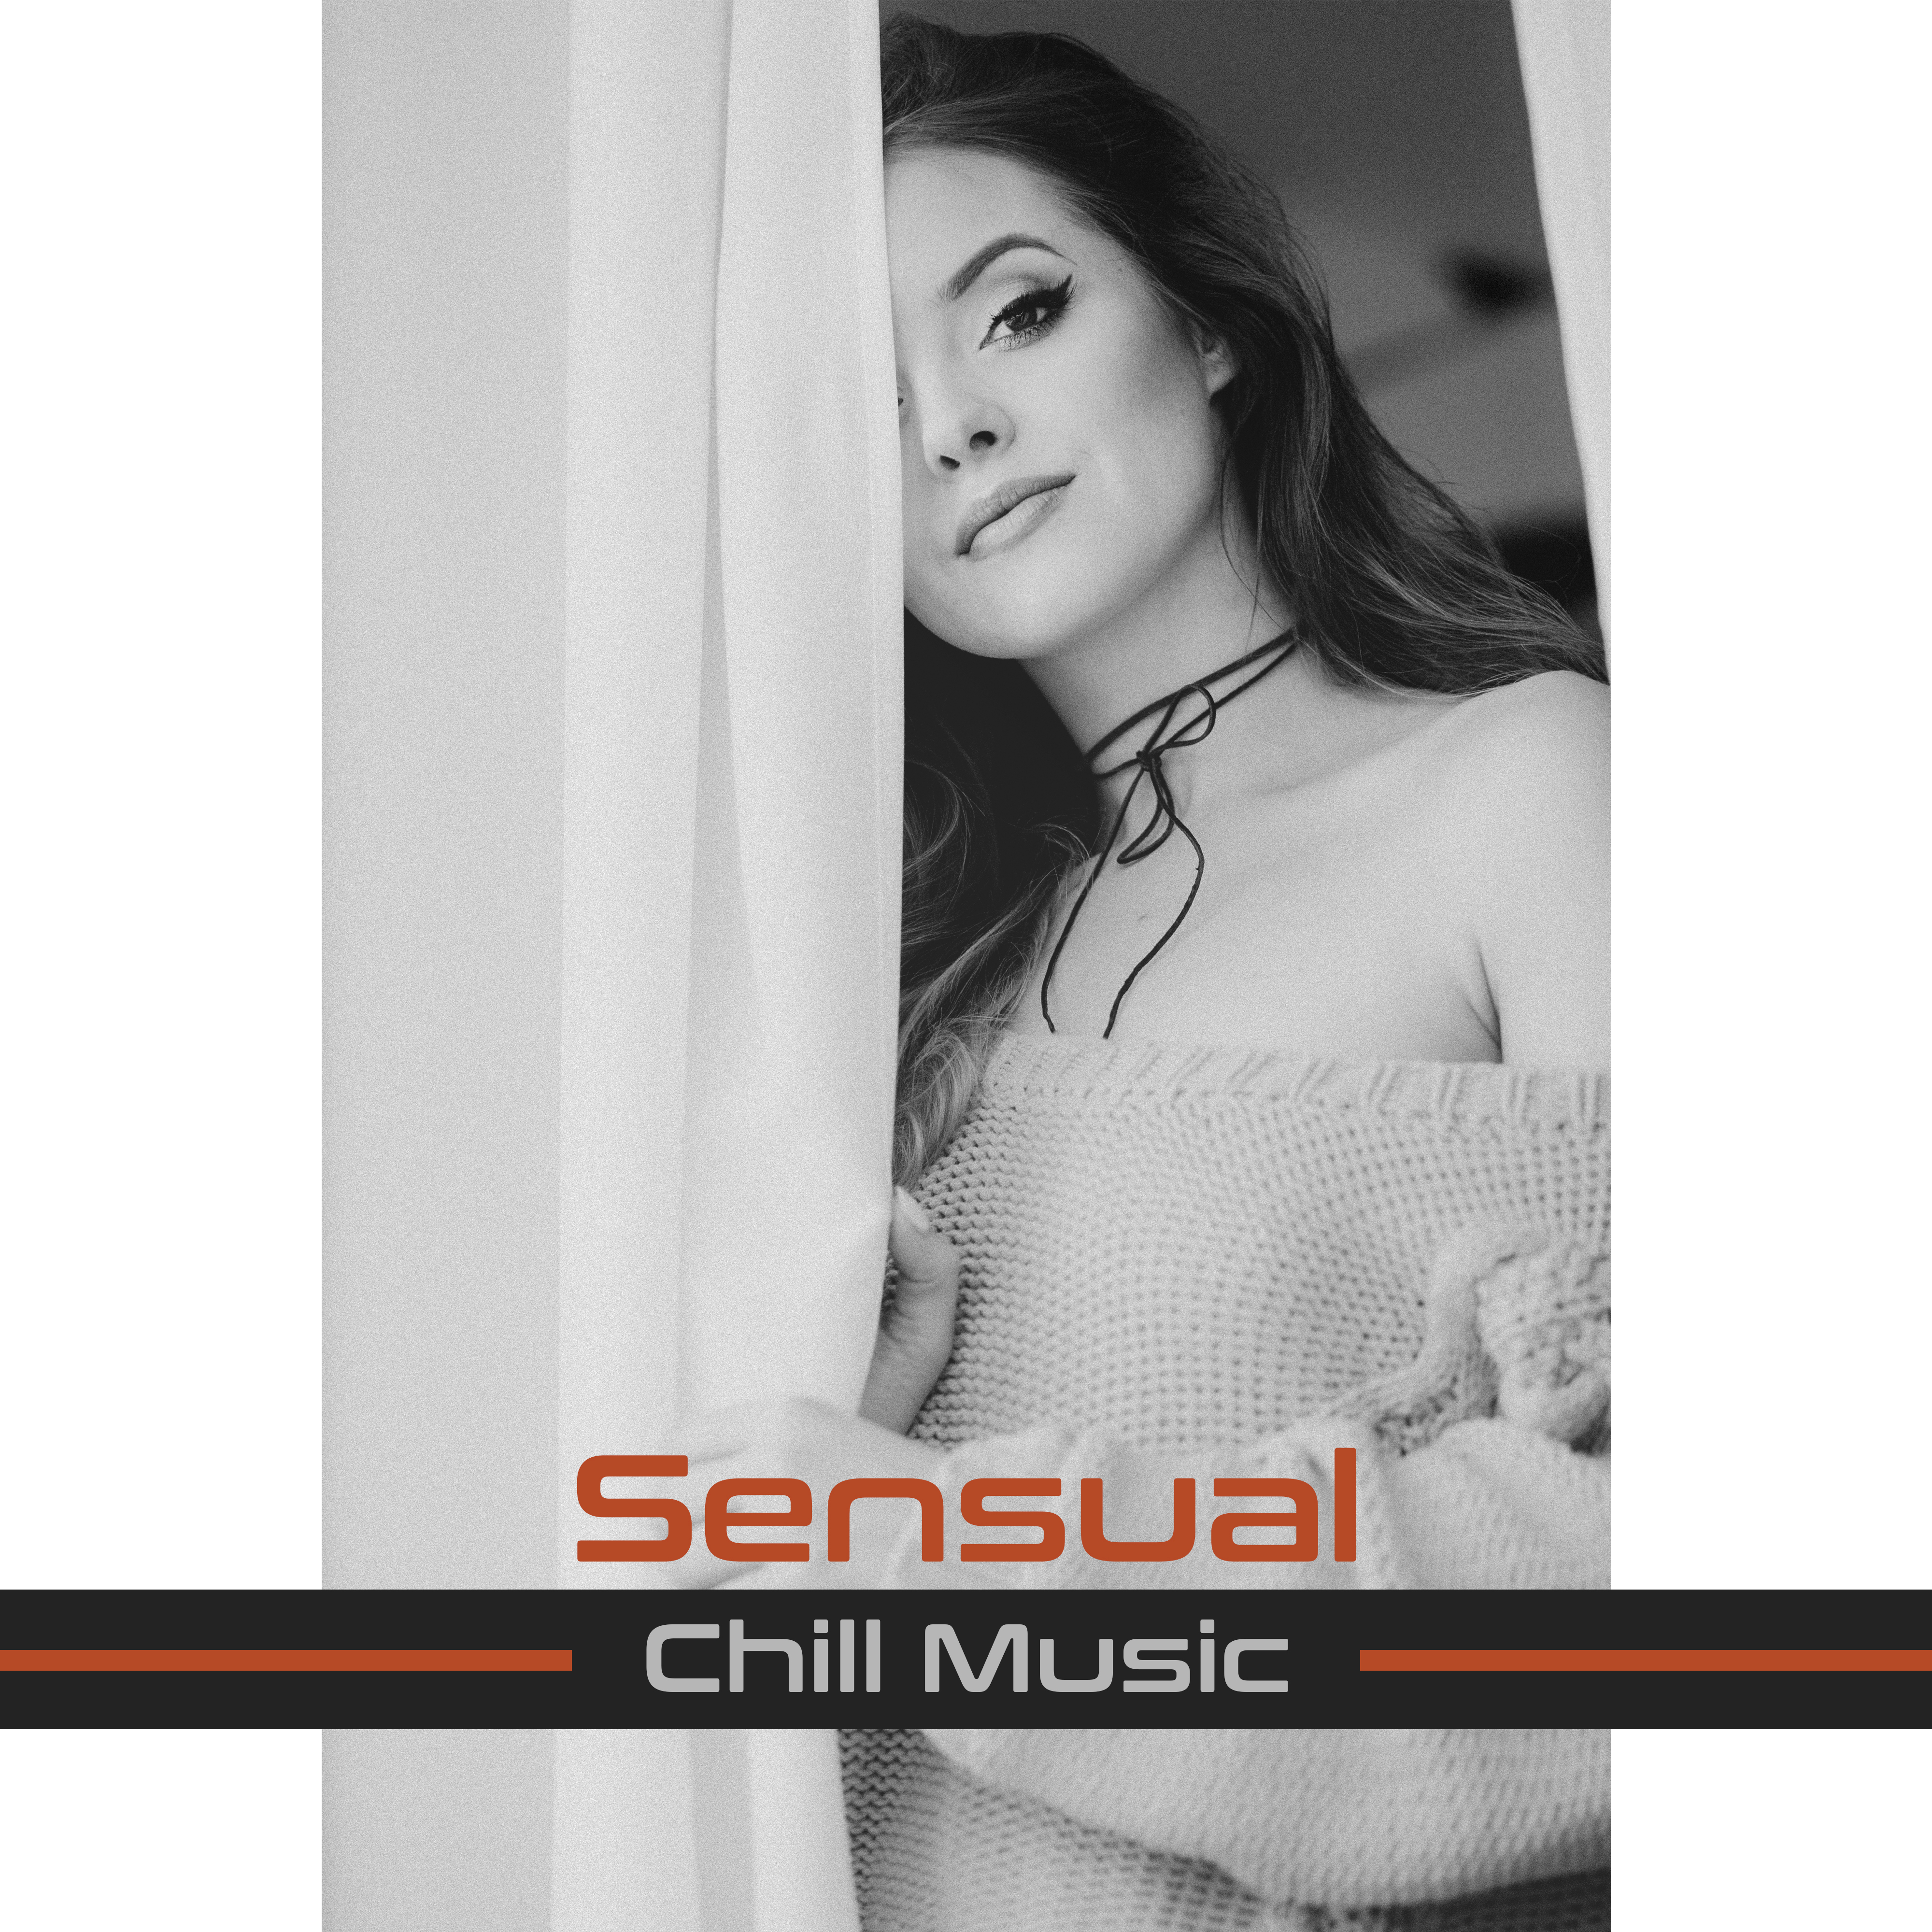 Sensual Chill Music – **** Summertime, Love & Peace, Chilled Waves, Relaxing Sounds